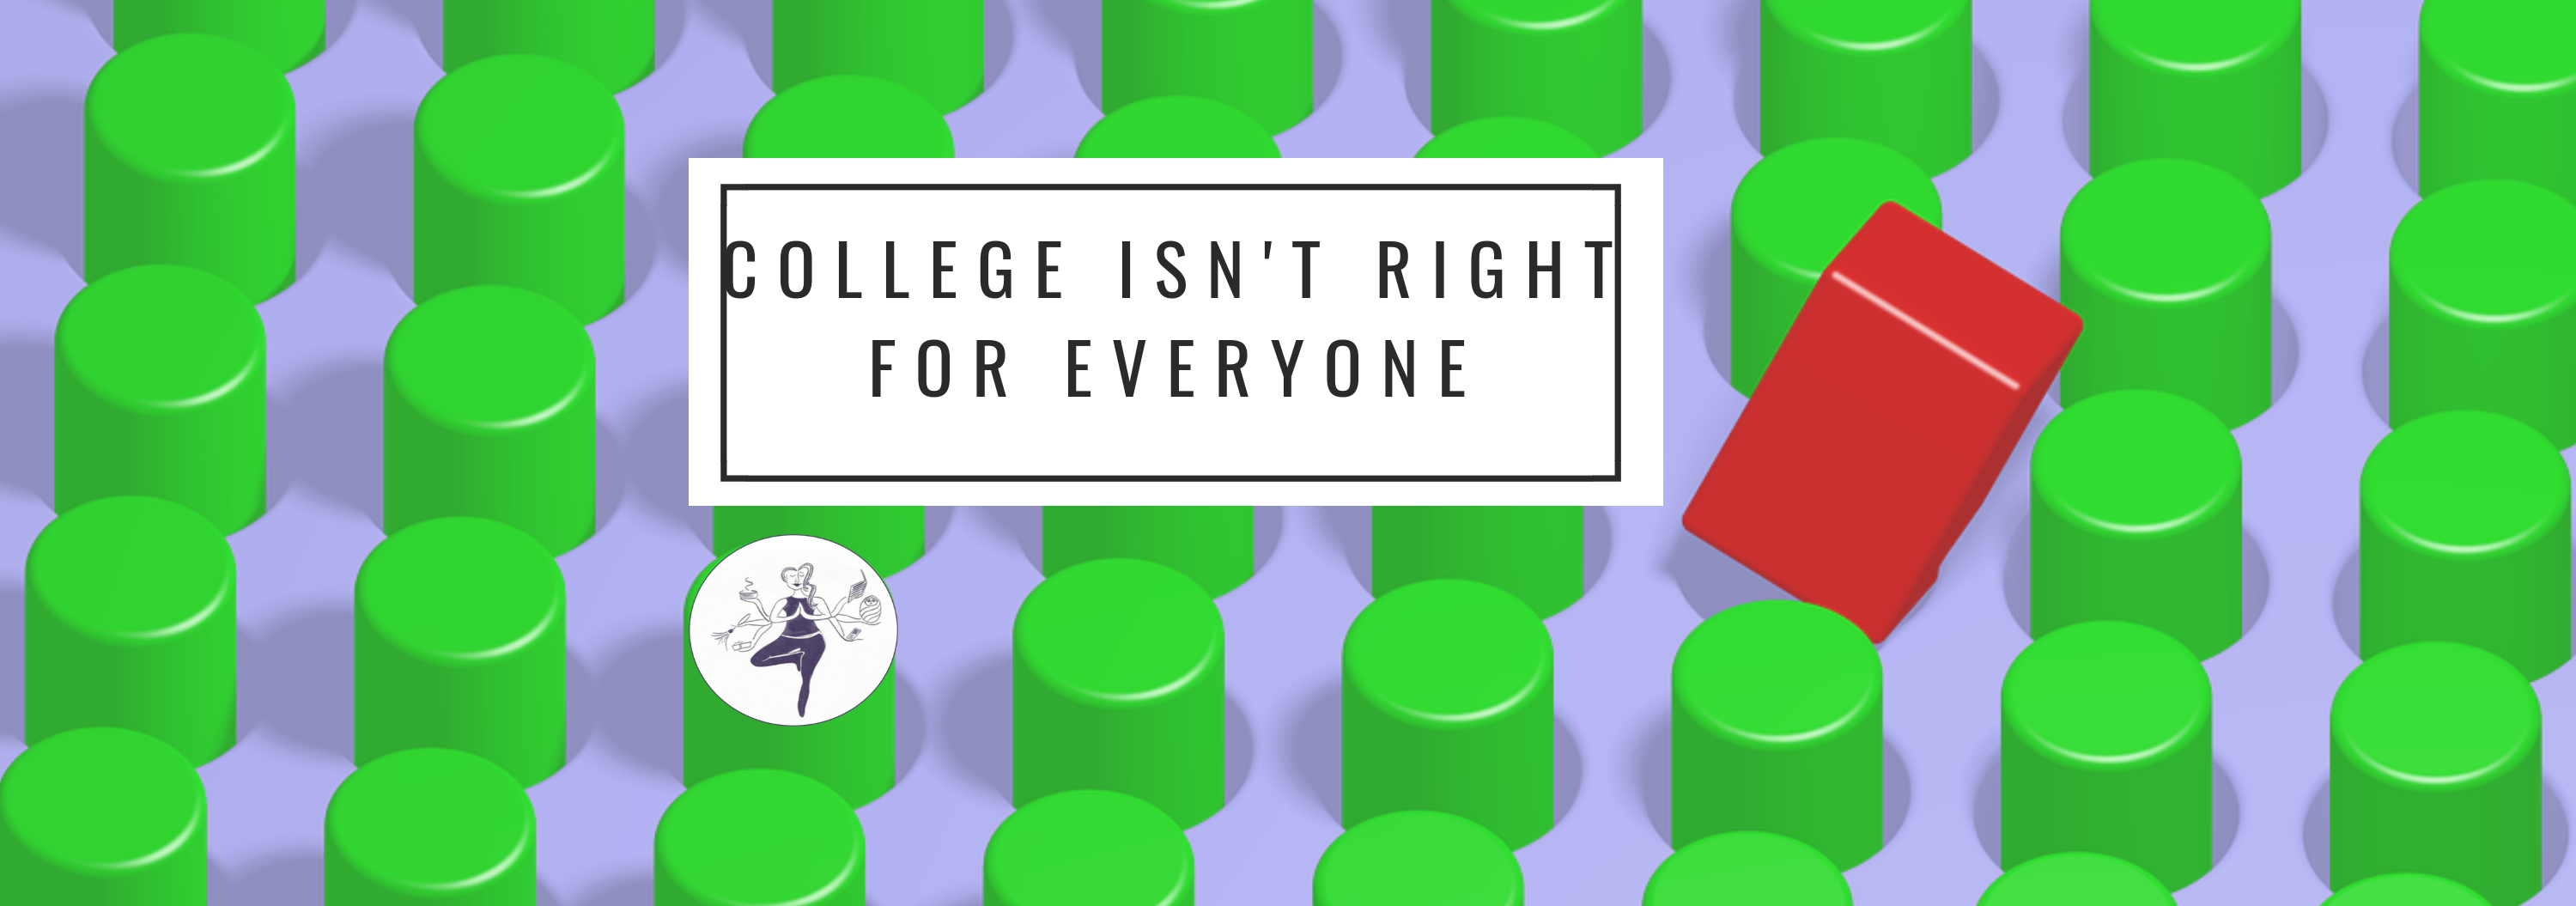 College Isn’t Right for Everyone